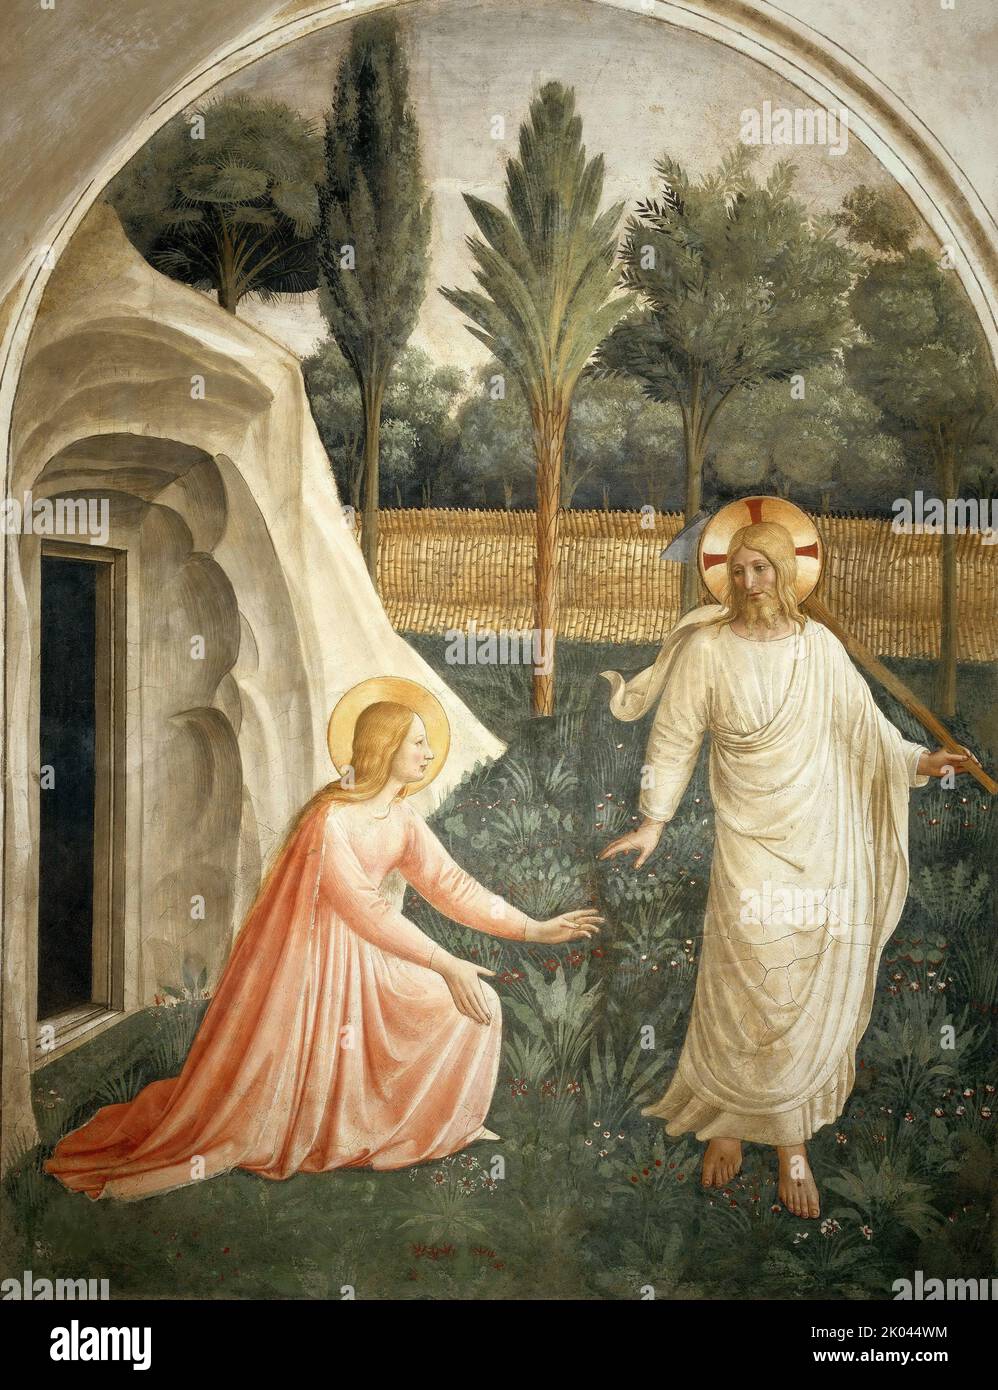 Noli me tangere, ca 1442. Found in the collection of the San Marco, Florence. Stock Photo